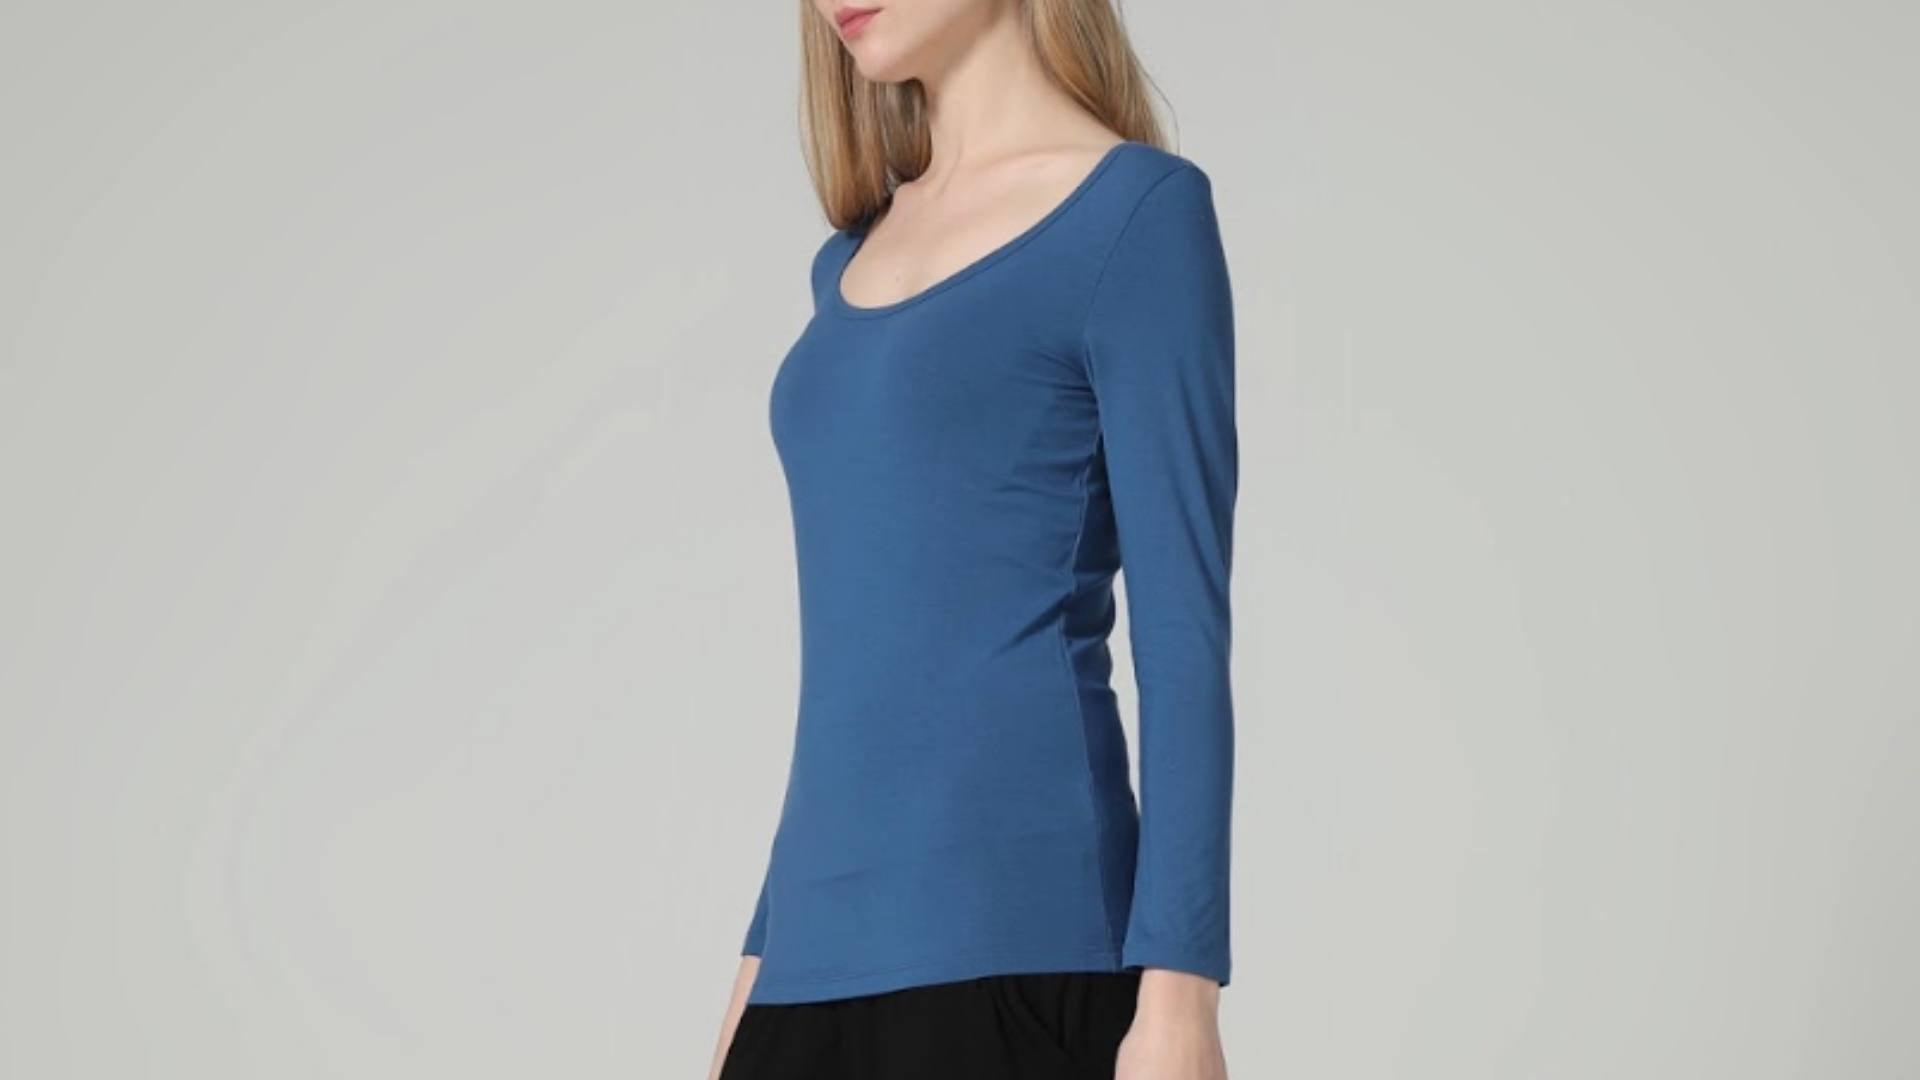 A woman wears a blue long sleeve t shirt and poses with her body facing the left direction.